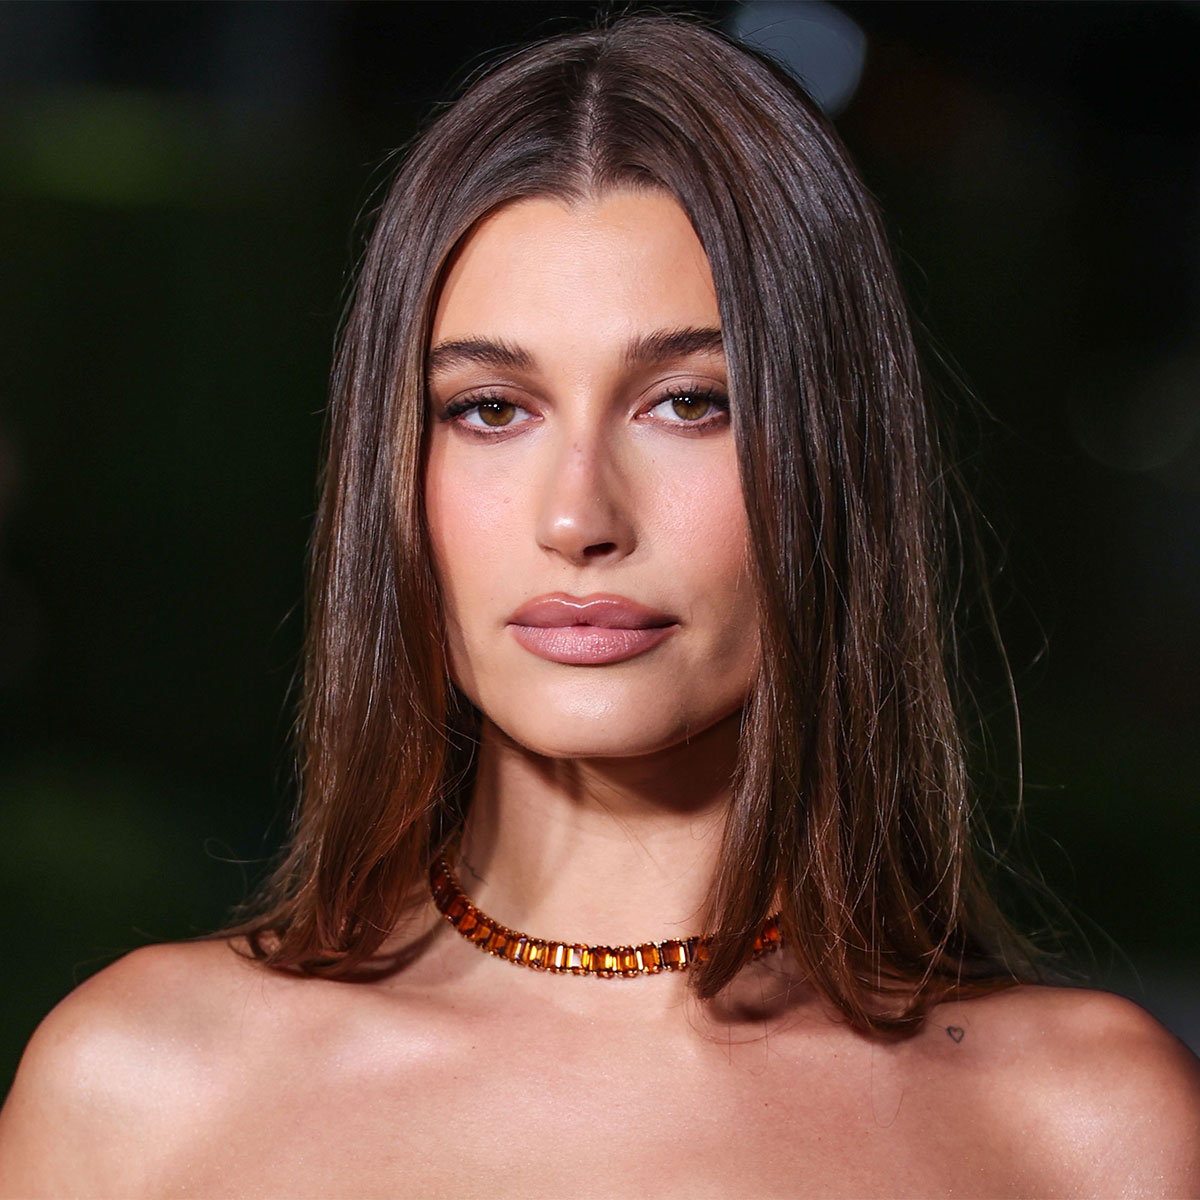 Fans React To Photos Of Hailey Bieber’s Early Career After Reported Nose Job: ‘So Much Better Before’